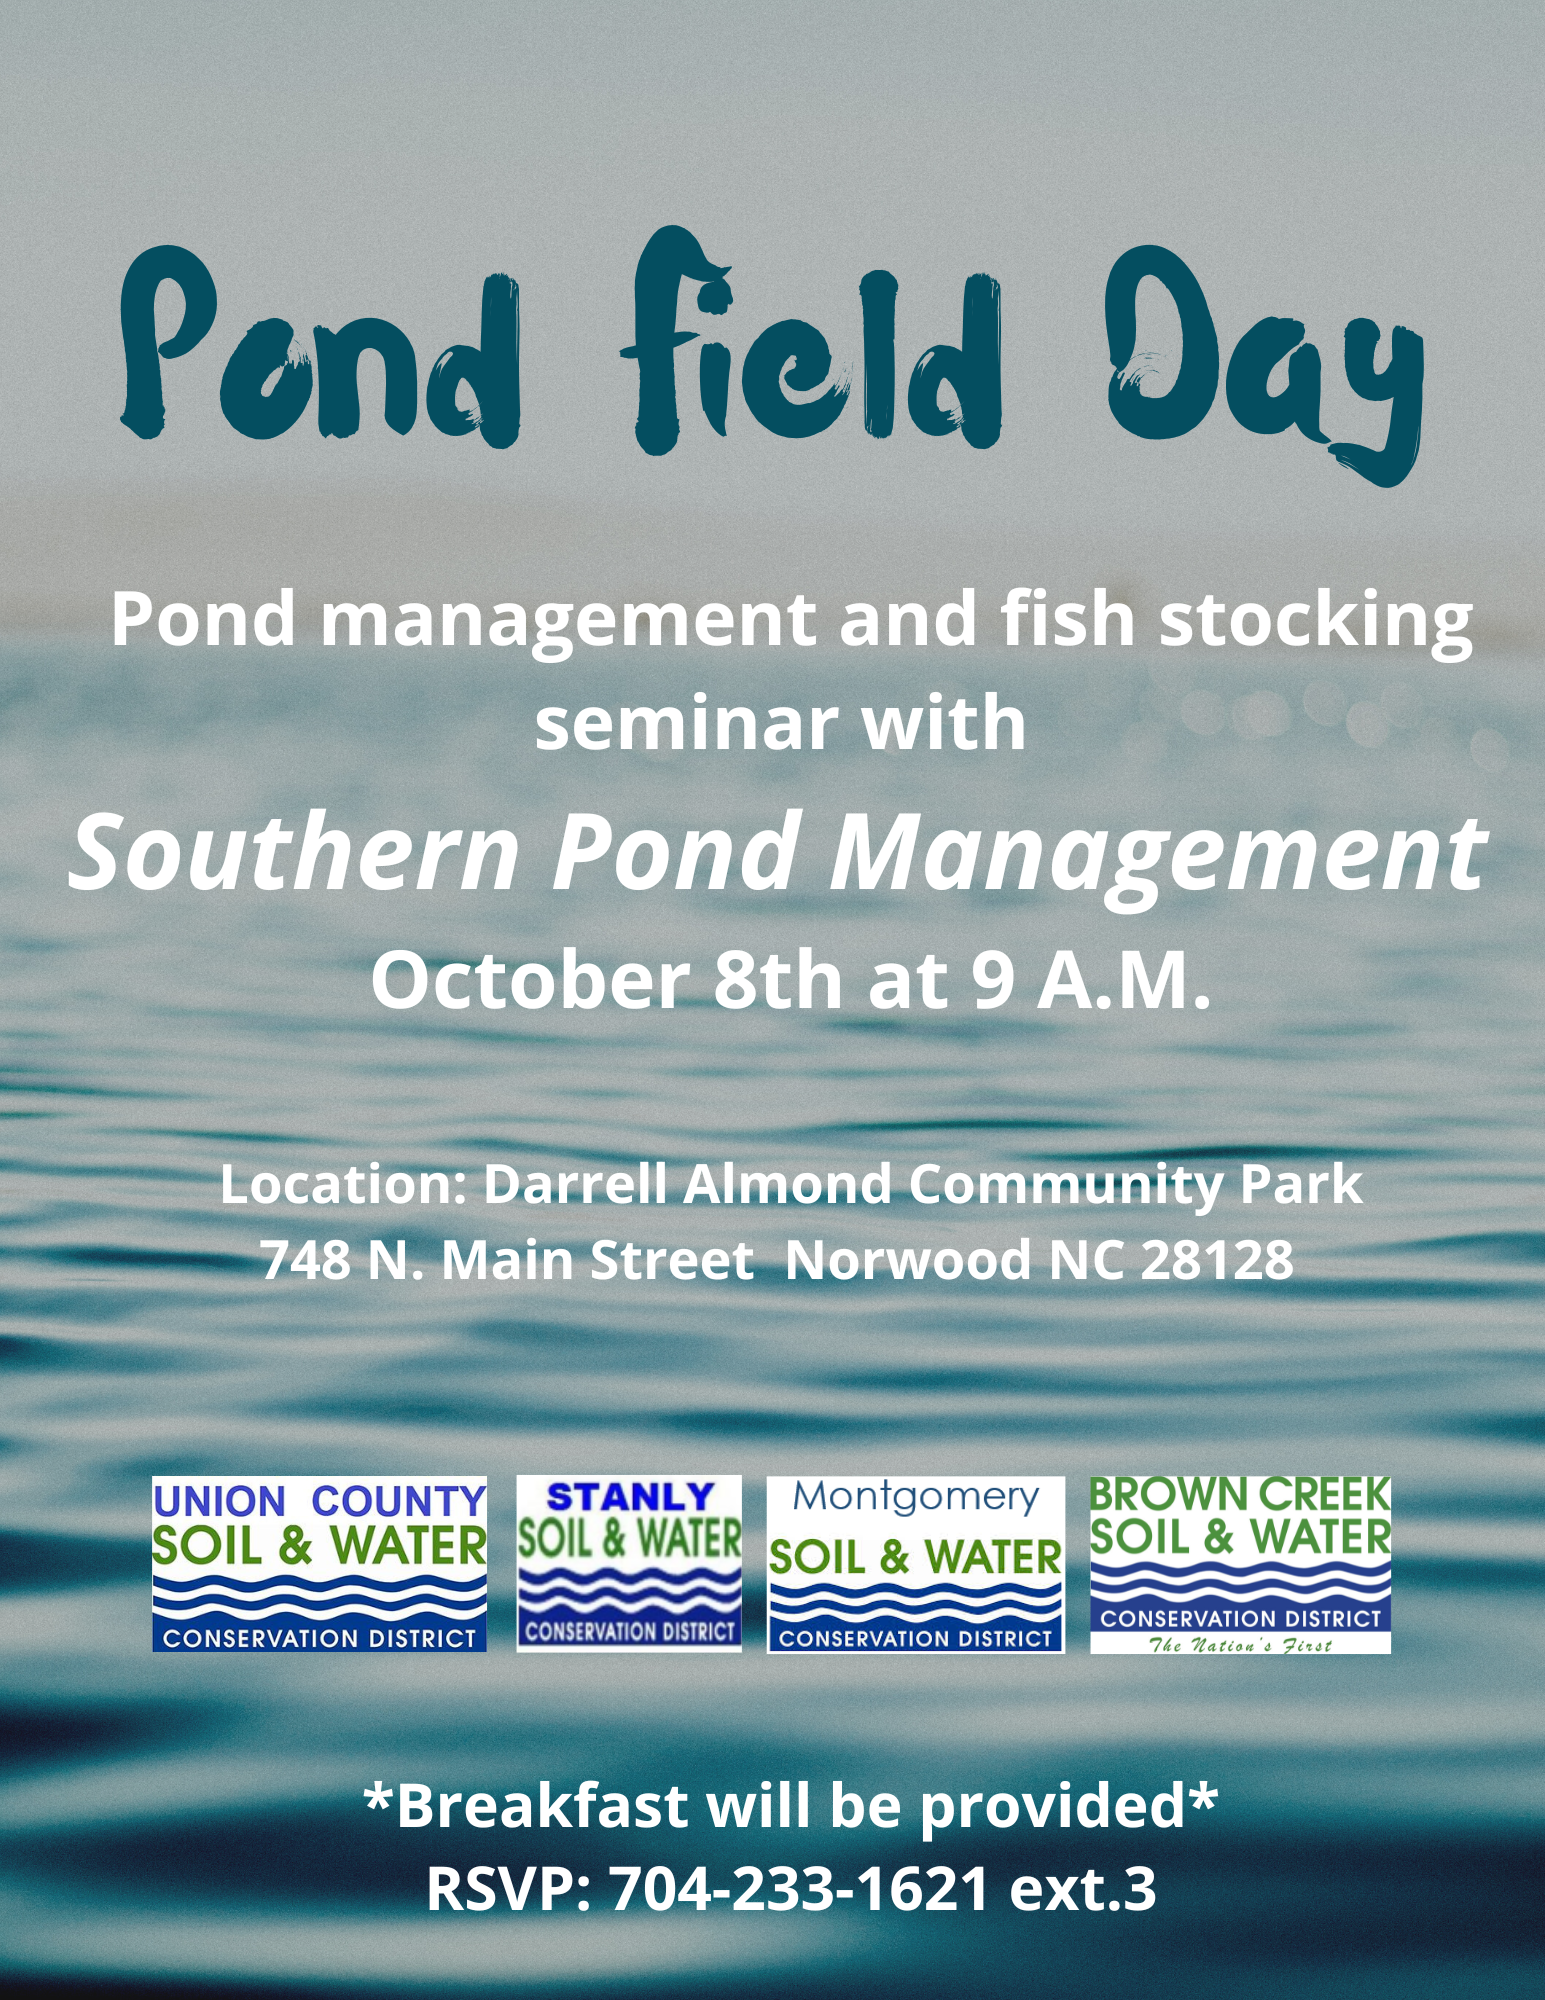 Pond Field Day, Pond Management, Southern Pond Management, How to Control Fish Populations, Fish in Pond, Pond Turnover